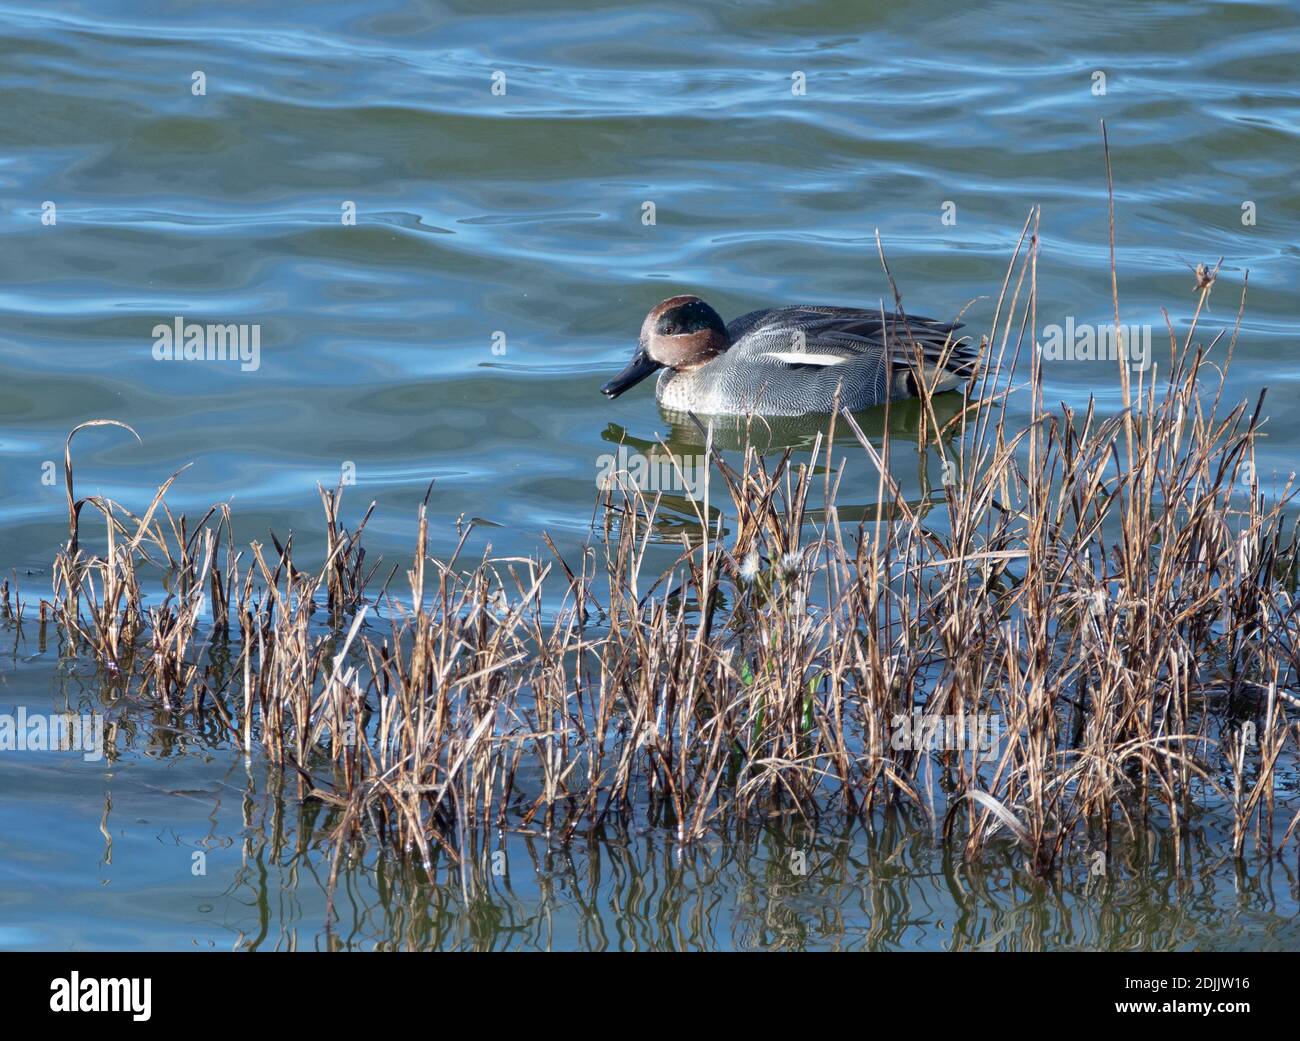 Teal Drake in some reeds with rippling water Stock Photo